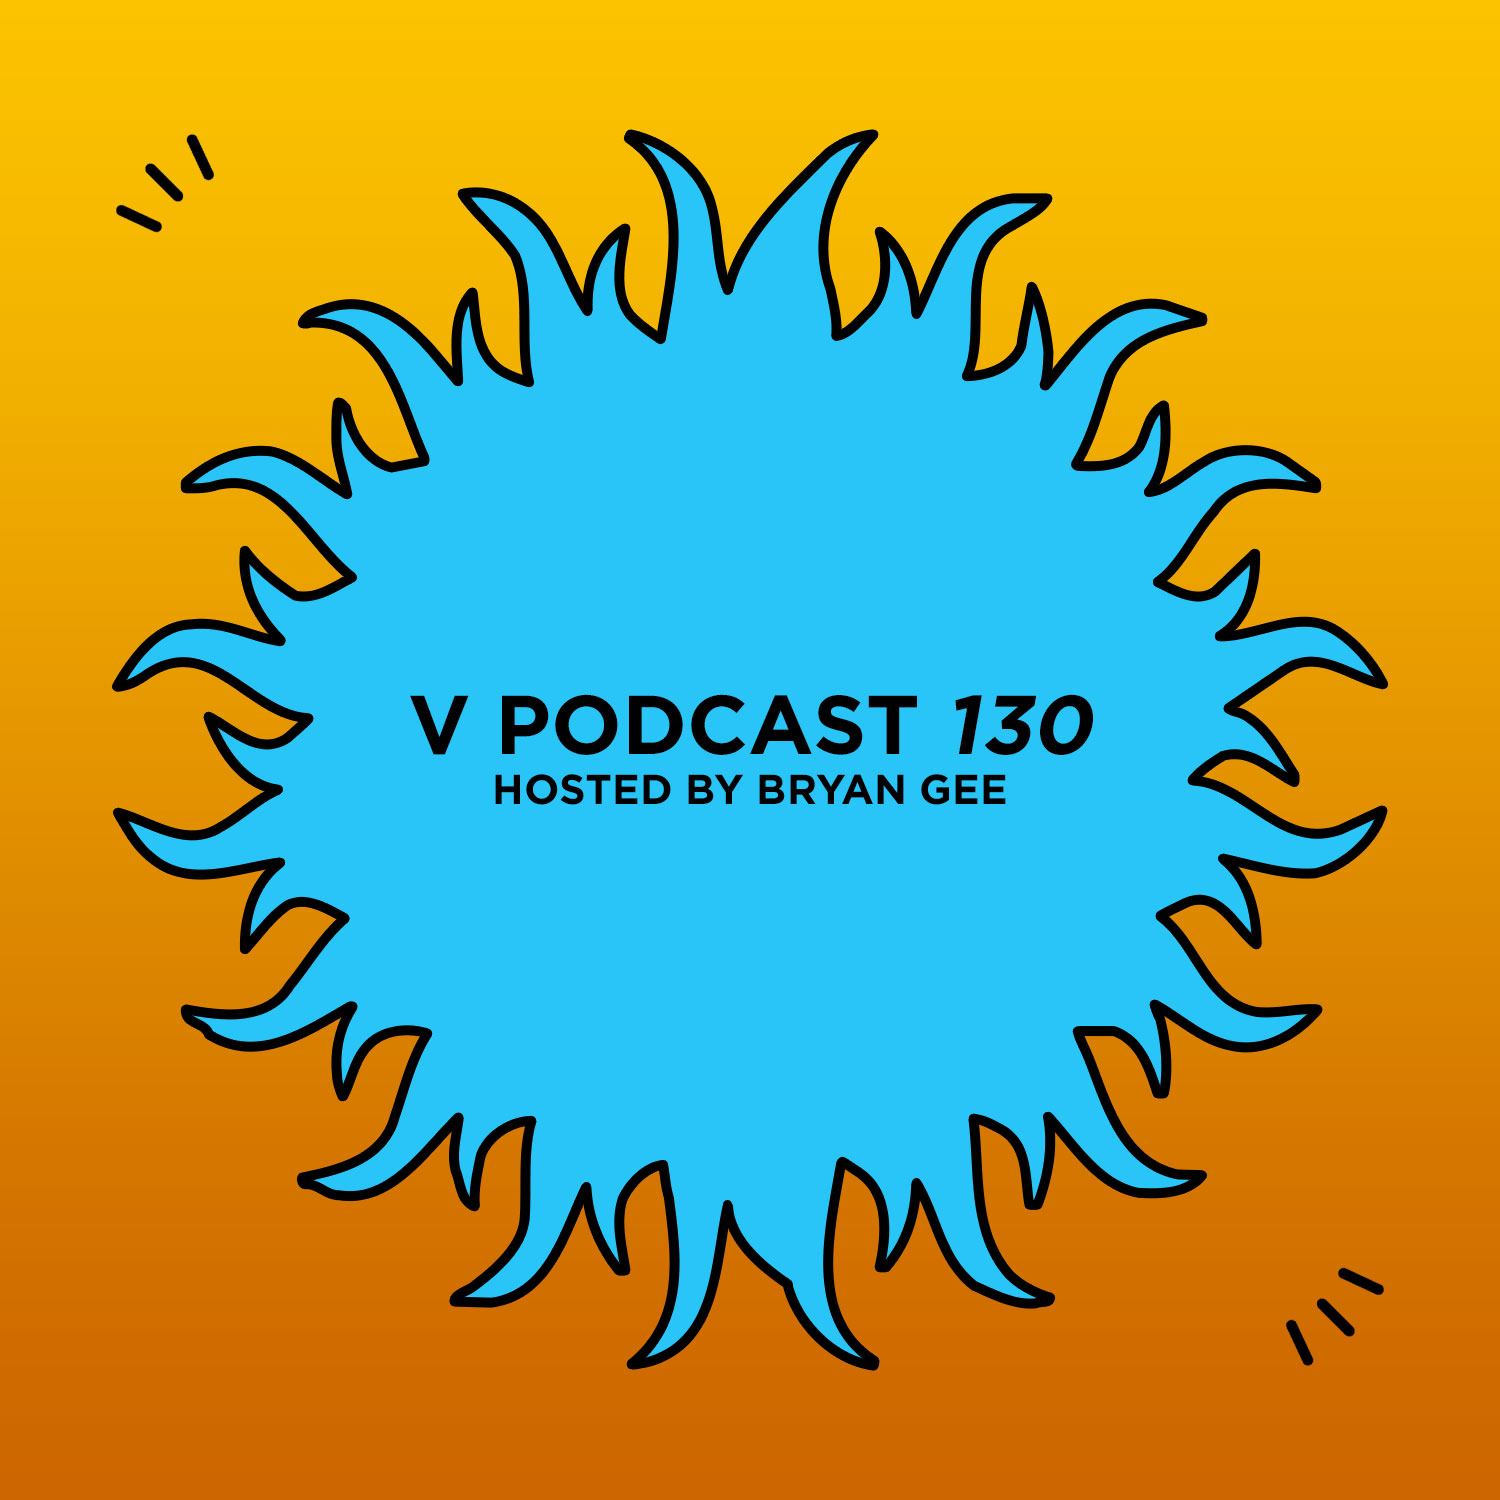 V Podcast 130 - Hosted by Bryan Gee Artwork